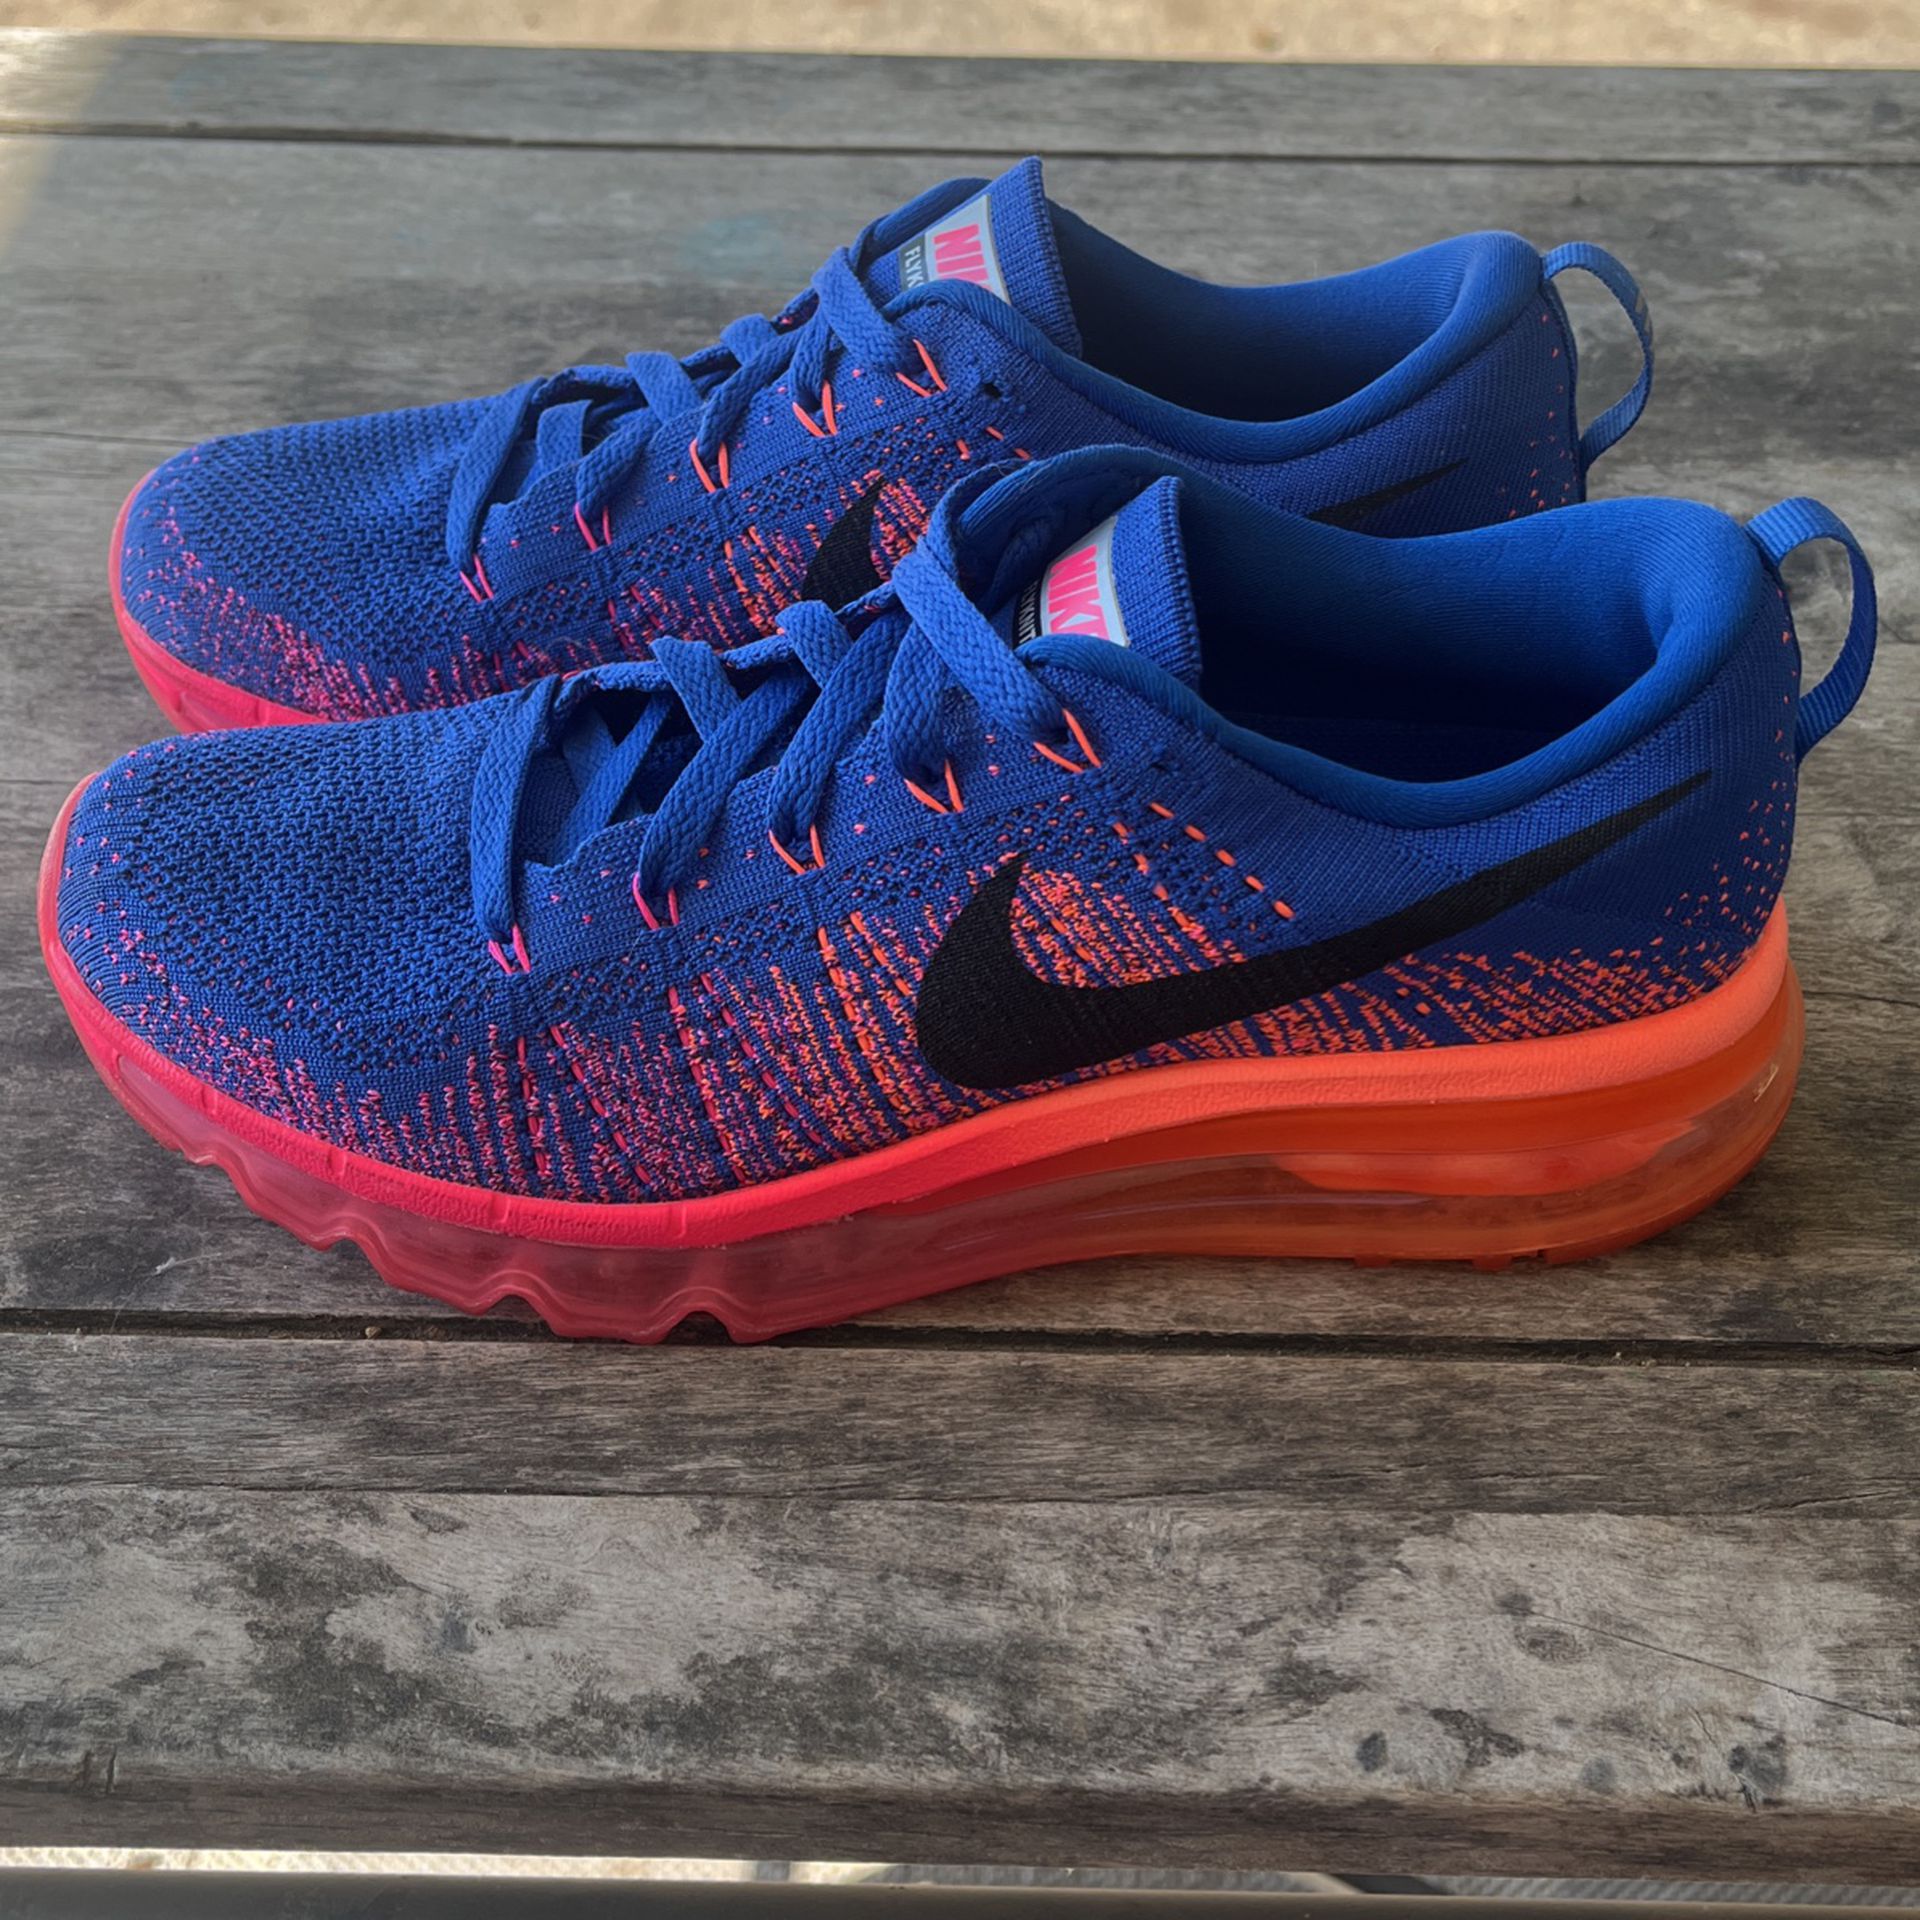 Nike Vapormax 2020 FK for Sale in Mesquite, TX - OfferUp